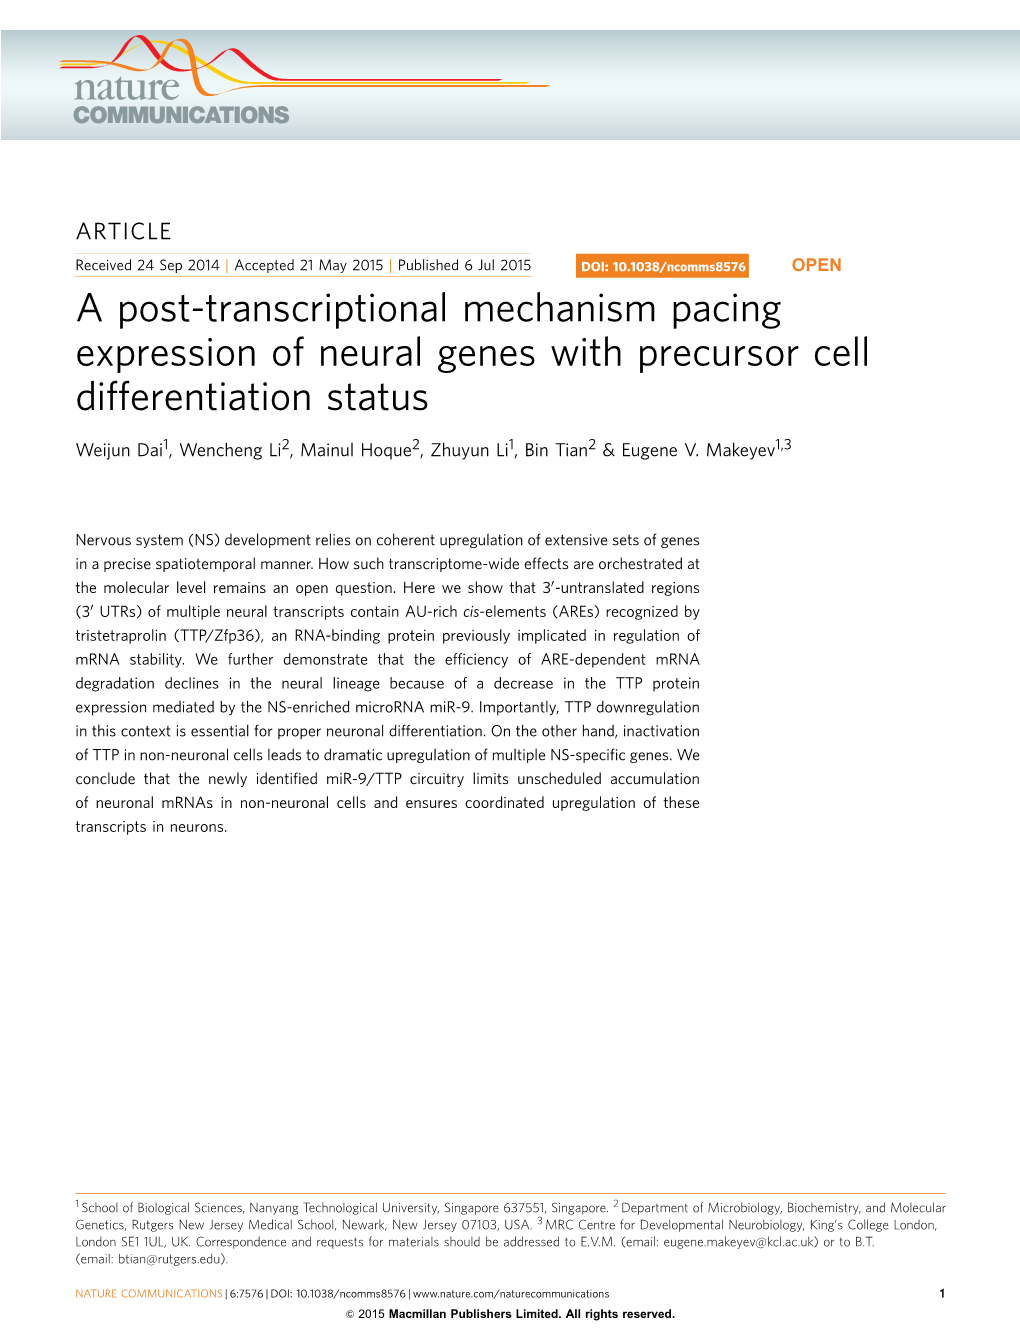 A Post-Transcriptional Mechanism Pacing Expression of Neural Genes with Precursor Cell Differentiation Status